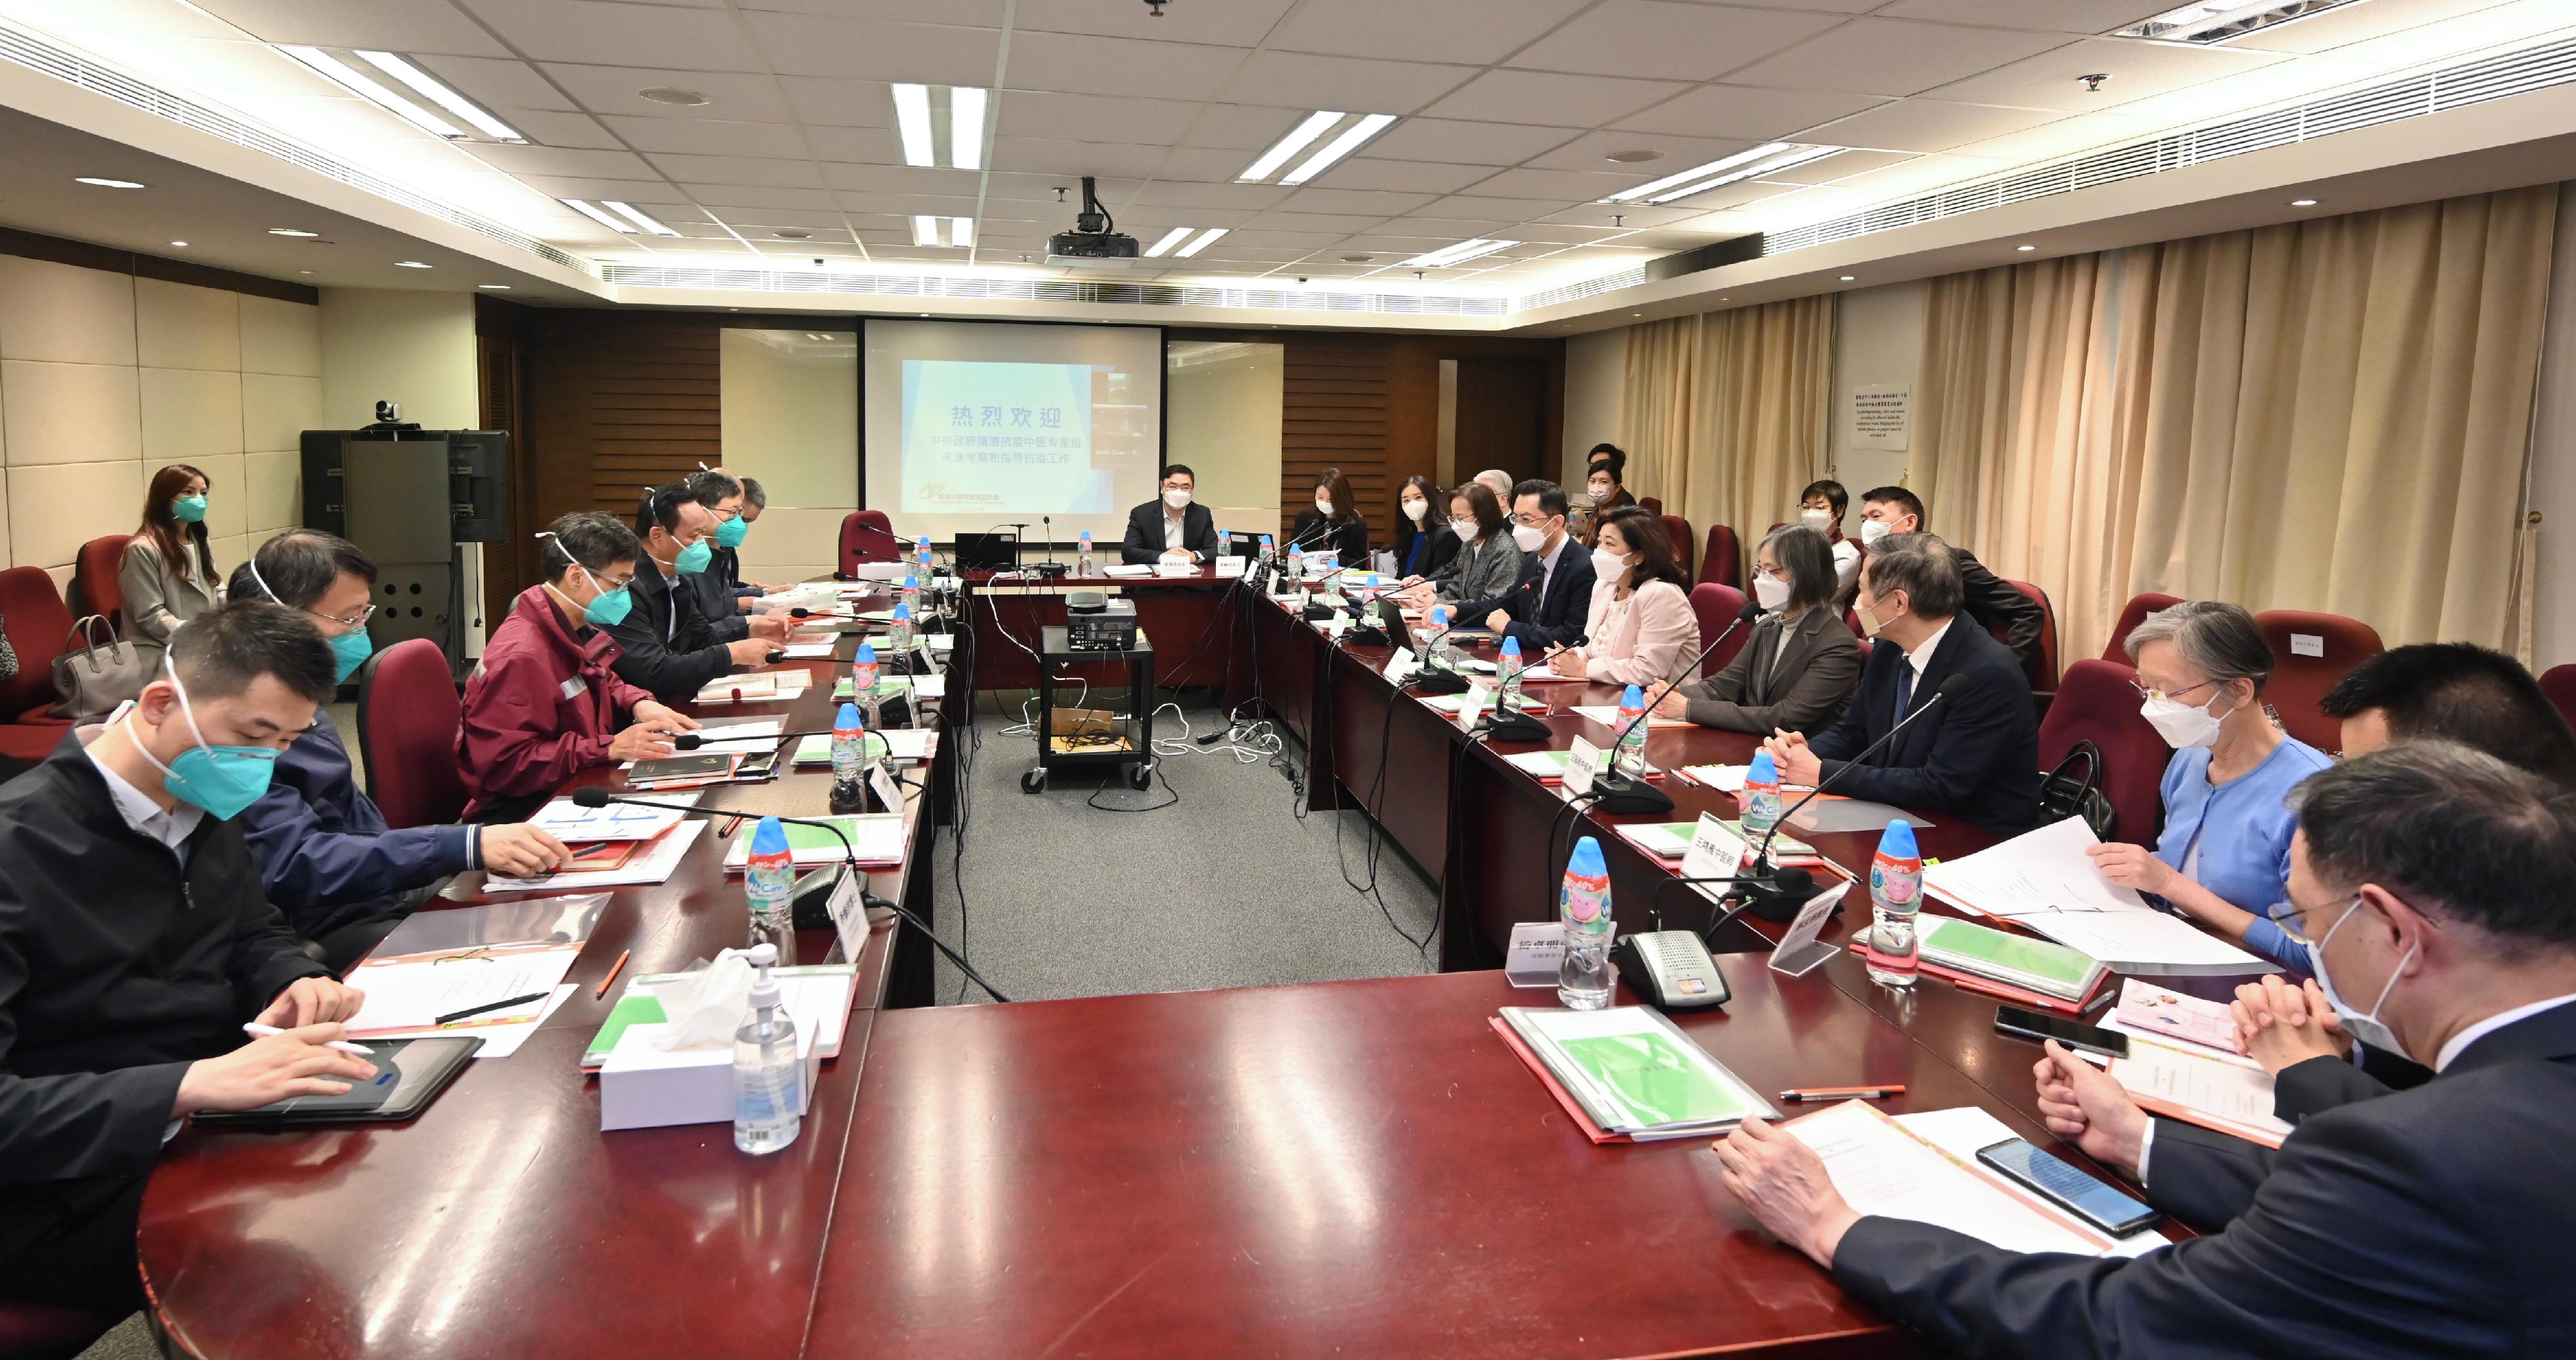 The Director of Health, Dr Ronald Lam (seventh right), together with the Chairman of the Chinese Medicine Council of Hong Kong, Mrs Jeanie Hu Leung Tze-Wai (sixth right) and the Chairman of the Chinese Medicine Practitioners Board, Dr Wong Yu-yeuk (fifth right), hold a meeting with the Leader of the Mainland Chinese medicine expert group of the Central Authorities, Mr Tong Xiaolin (fourth left) and other group members this morning (March 30) to exchange views on the current regulation and development of Chinese medicine in Hong Kong, with in-depth discussion on measures in fighting against the epidemic with Chinese medicine.